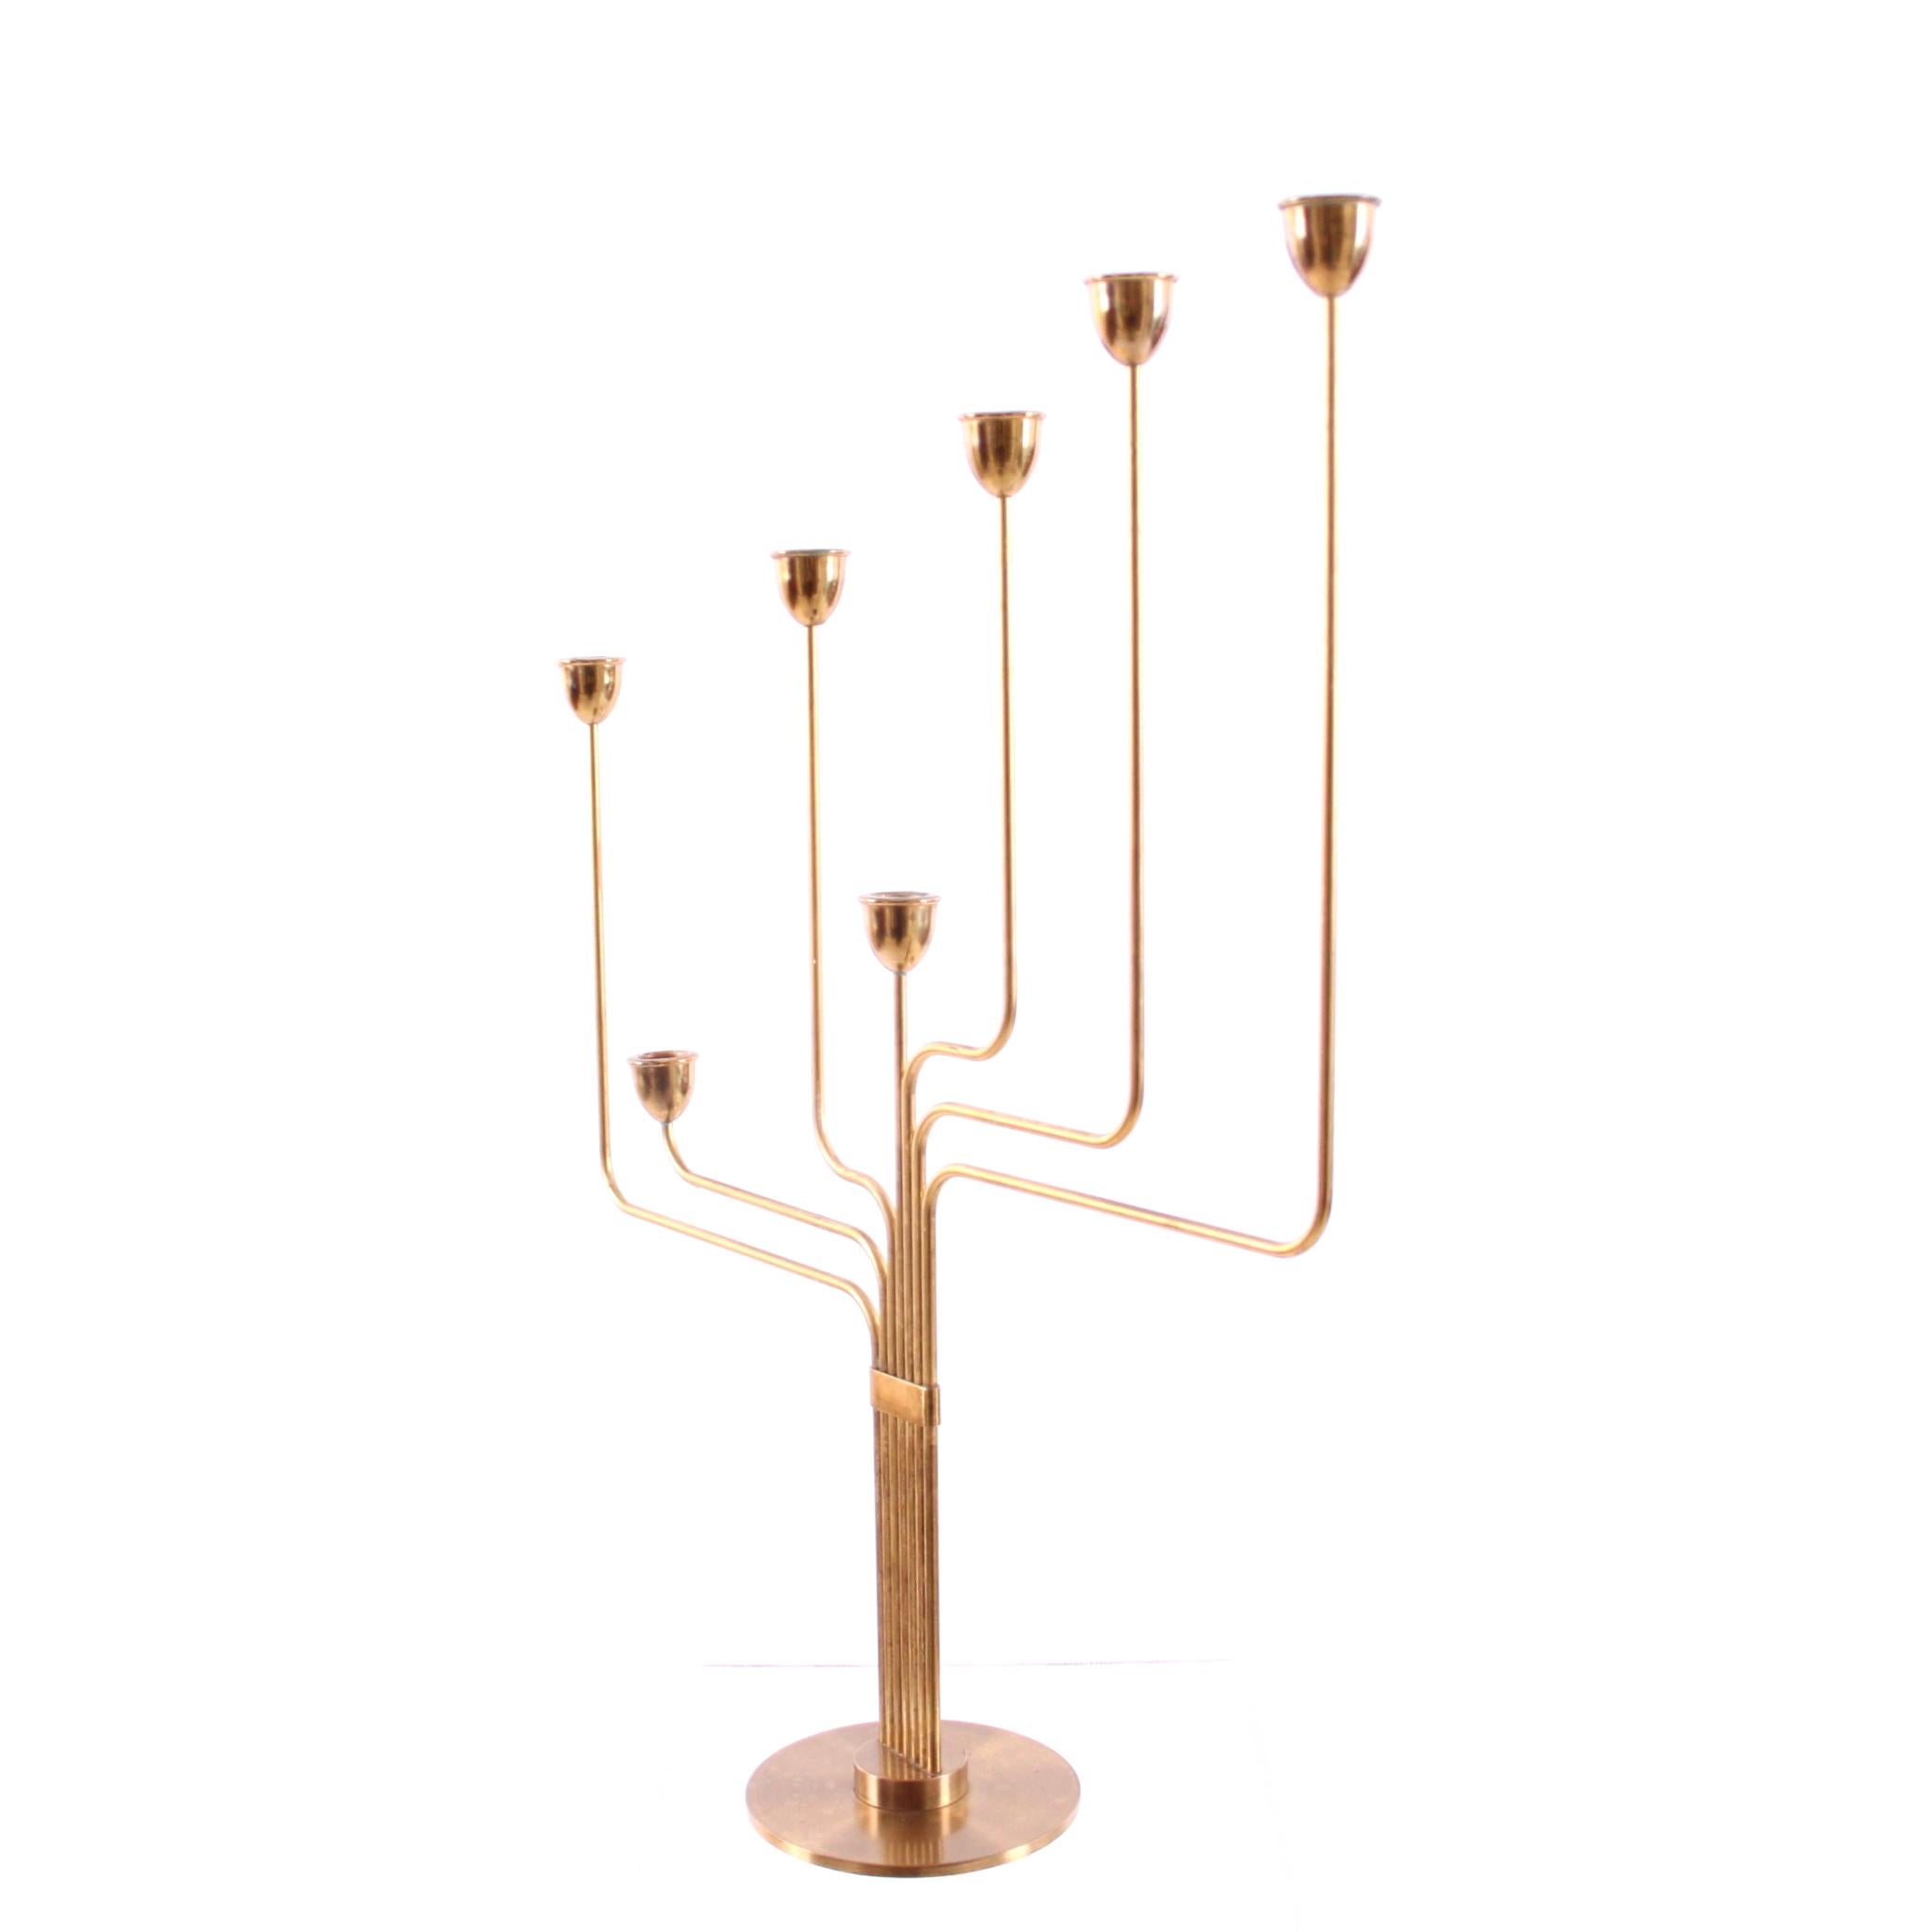 PIET HEIN - SCANDINAVIAN MODERN

An exceptionally beautiful candelabrum by the Danish modernist and designer, poet, mathematician and architect Piet Hein. 

The candelabrum has seven arms and in solid brass. It was named 